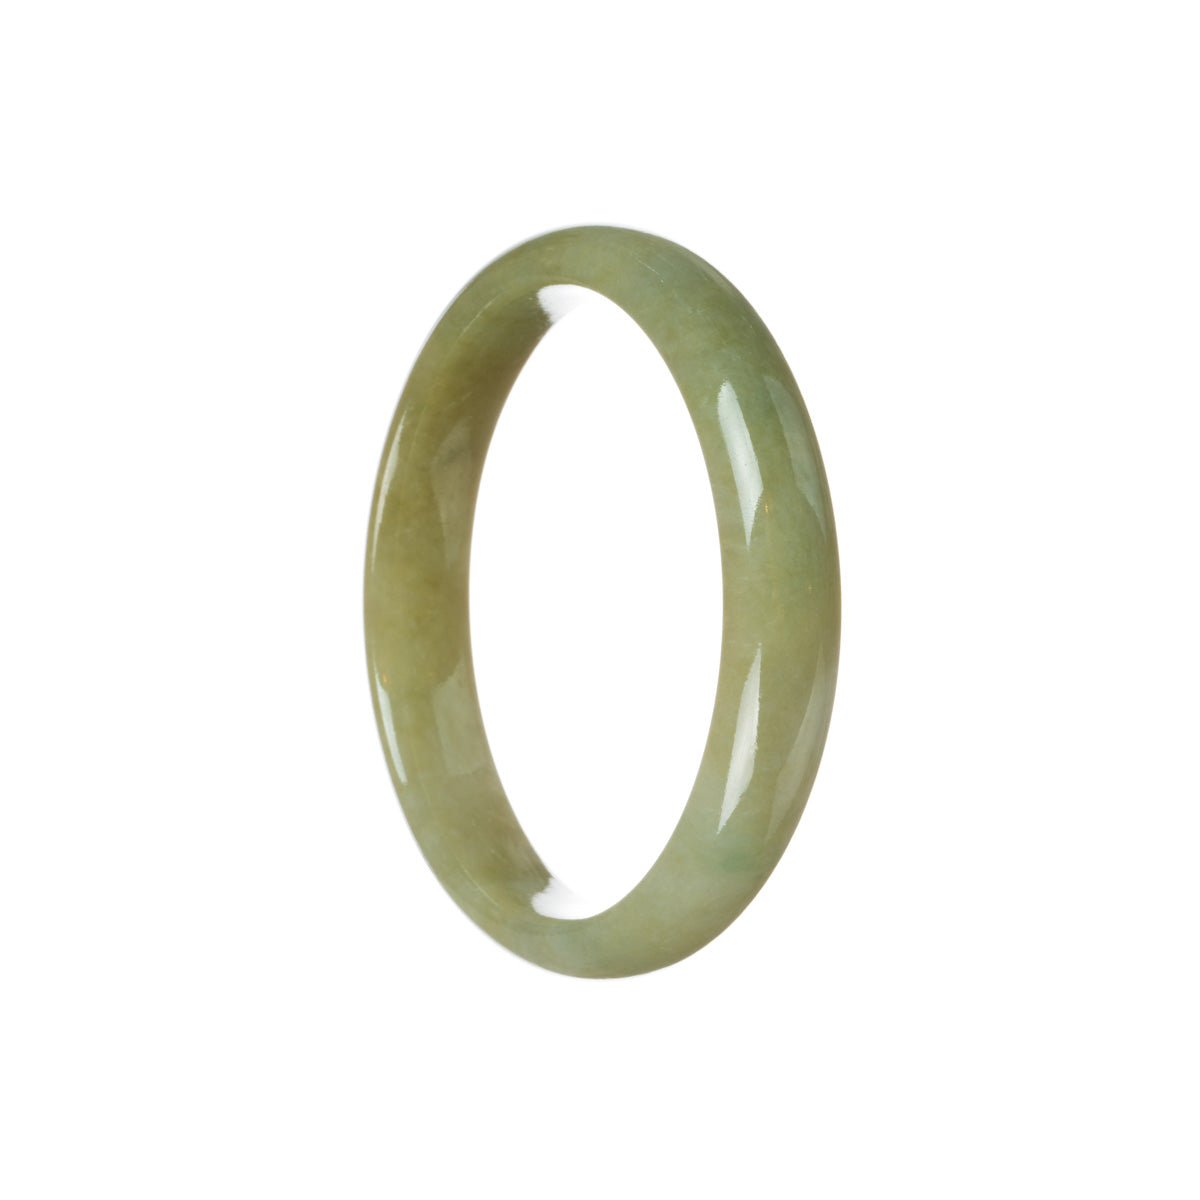 Genuine Type A Brownish green with white patch Jadeite Bangle Bracelet - 59mm Half Moon